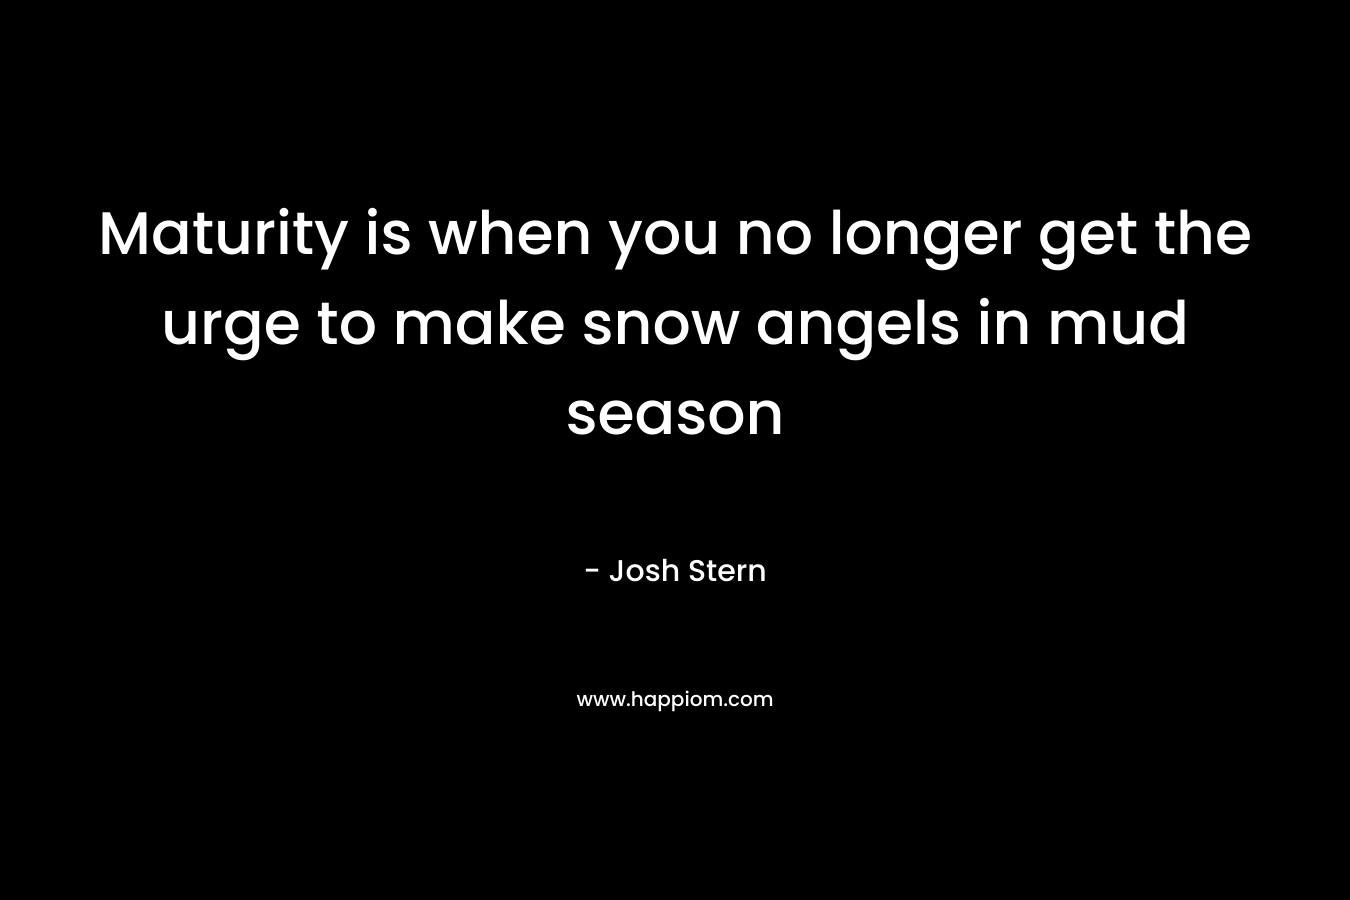 Maturity is when you no longer get the urge to make snow angels in mud season – Josh Stern